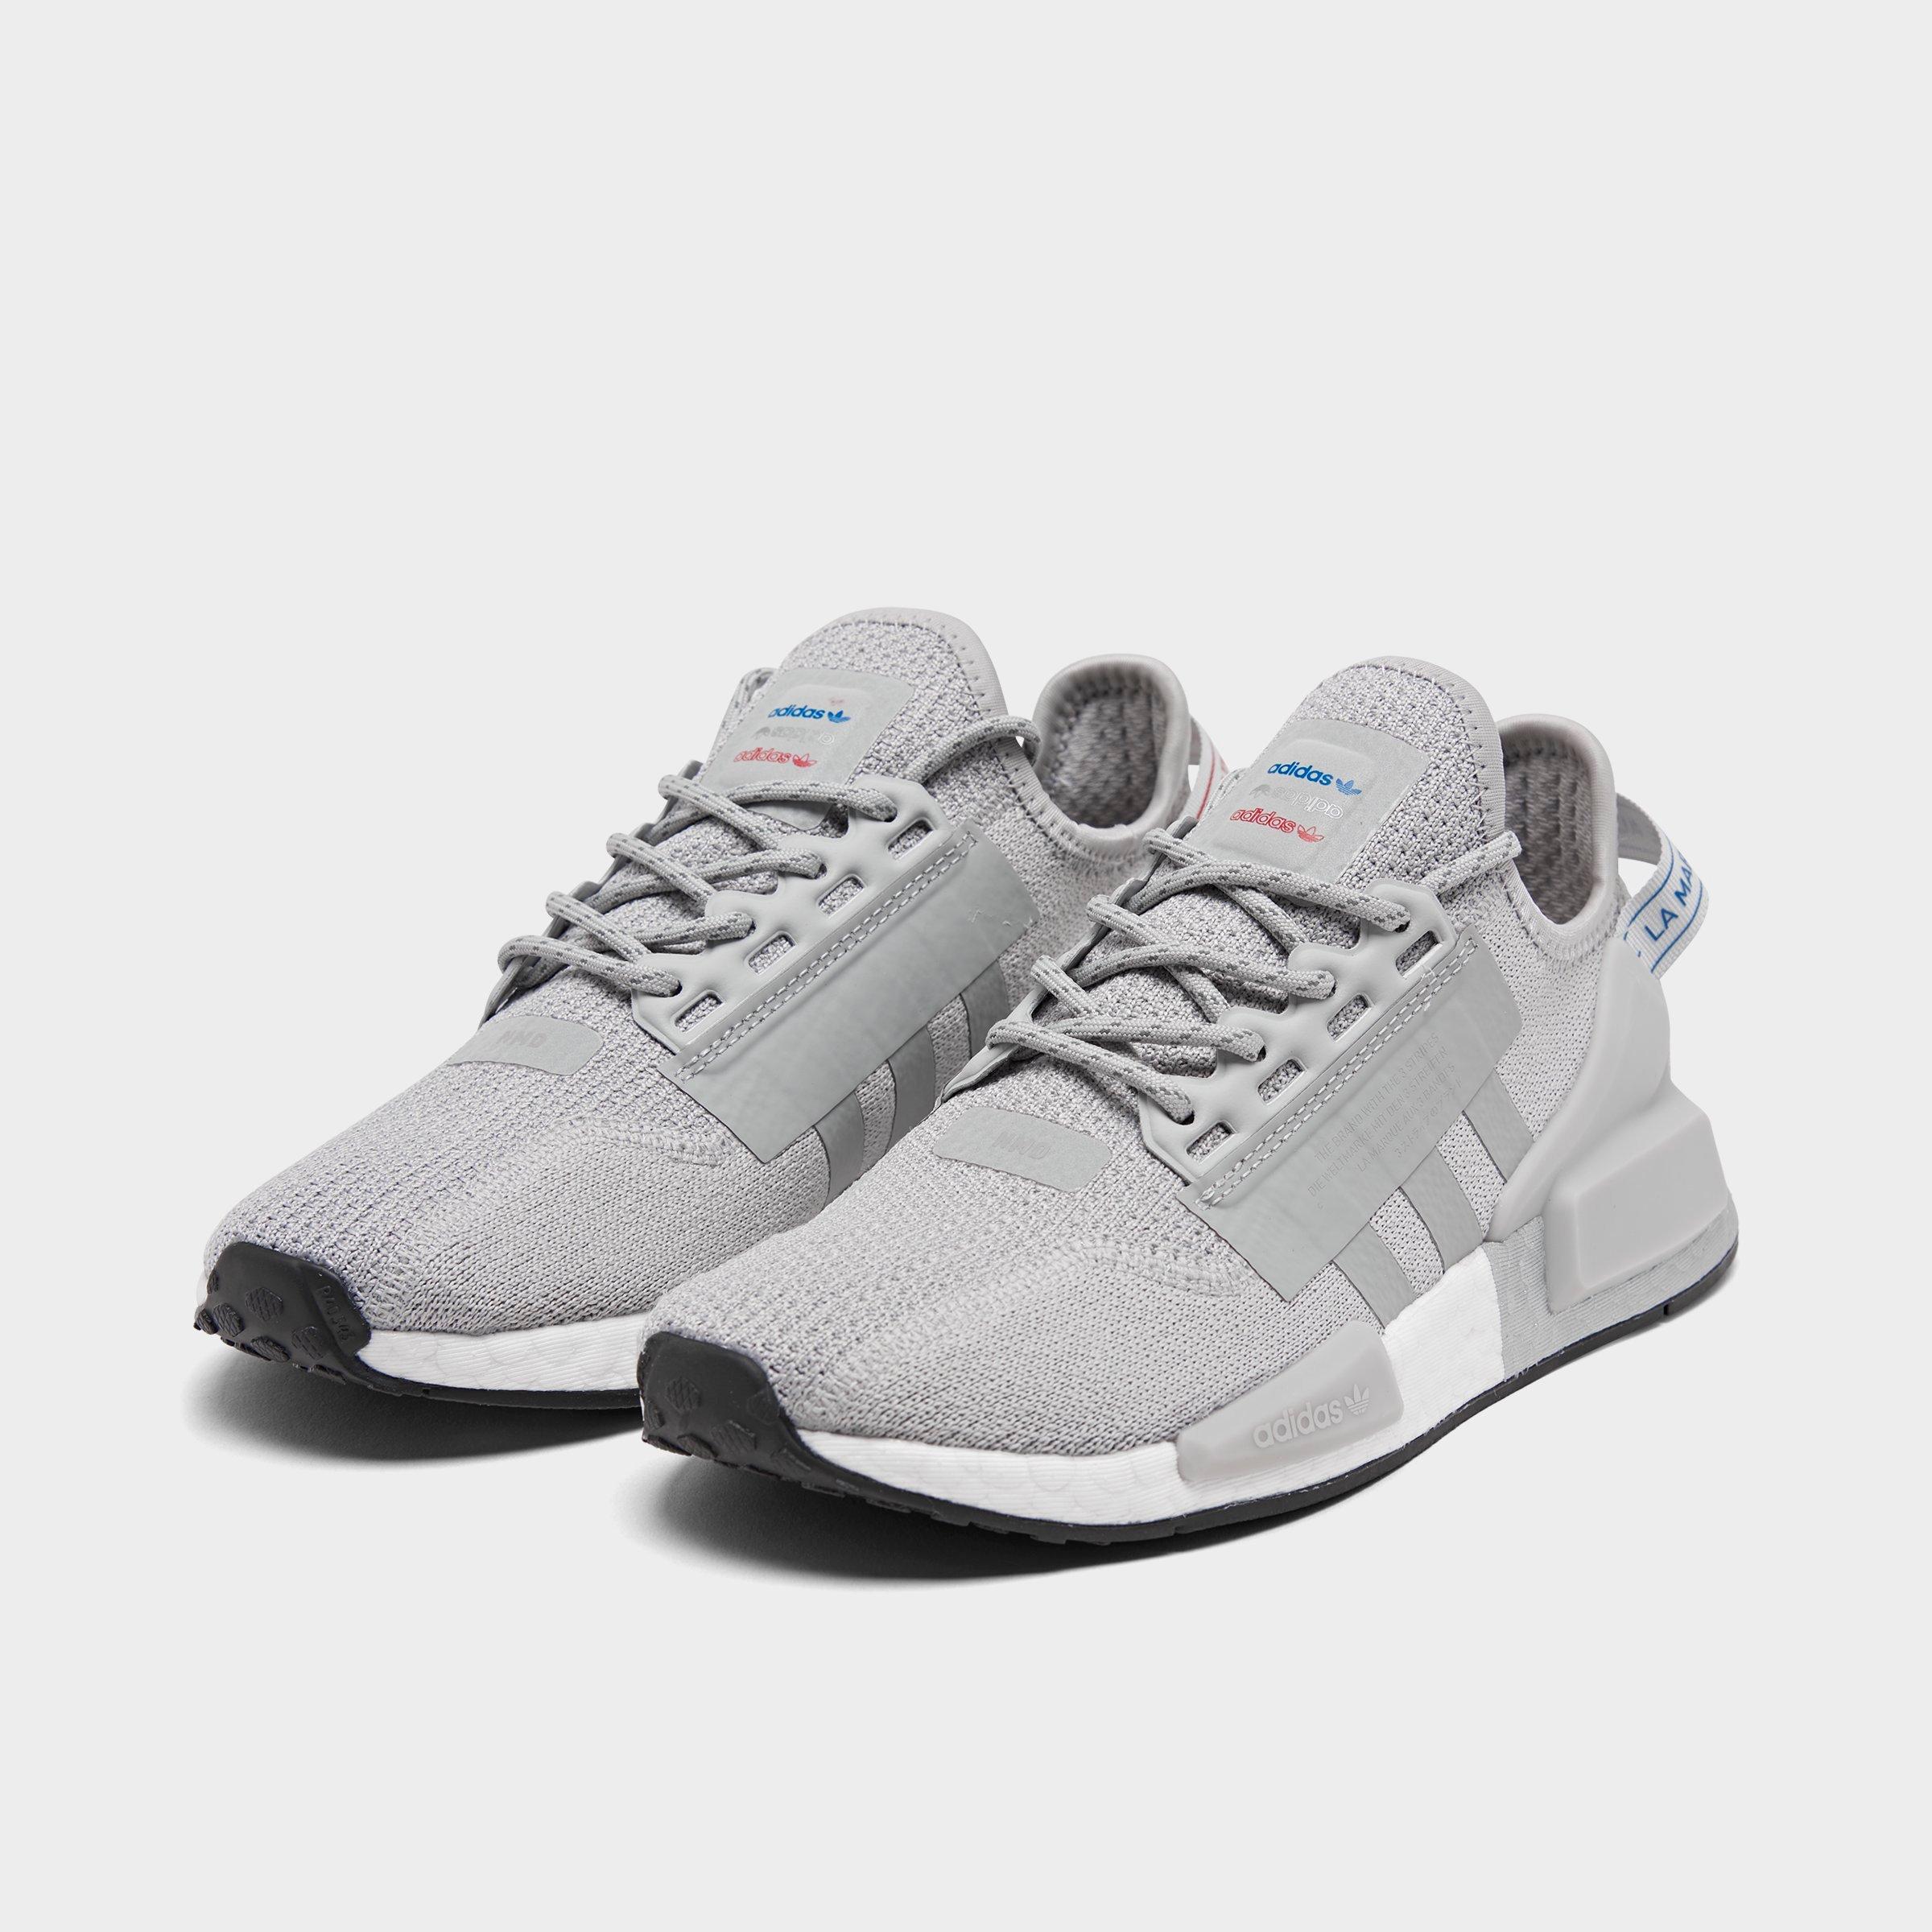 The adidas NMD R1 Glitch Camo Solid Gray Is Now Available